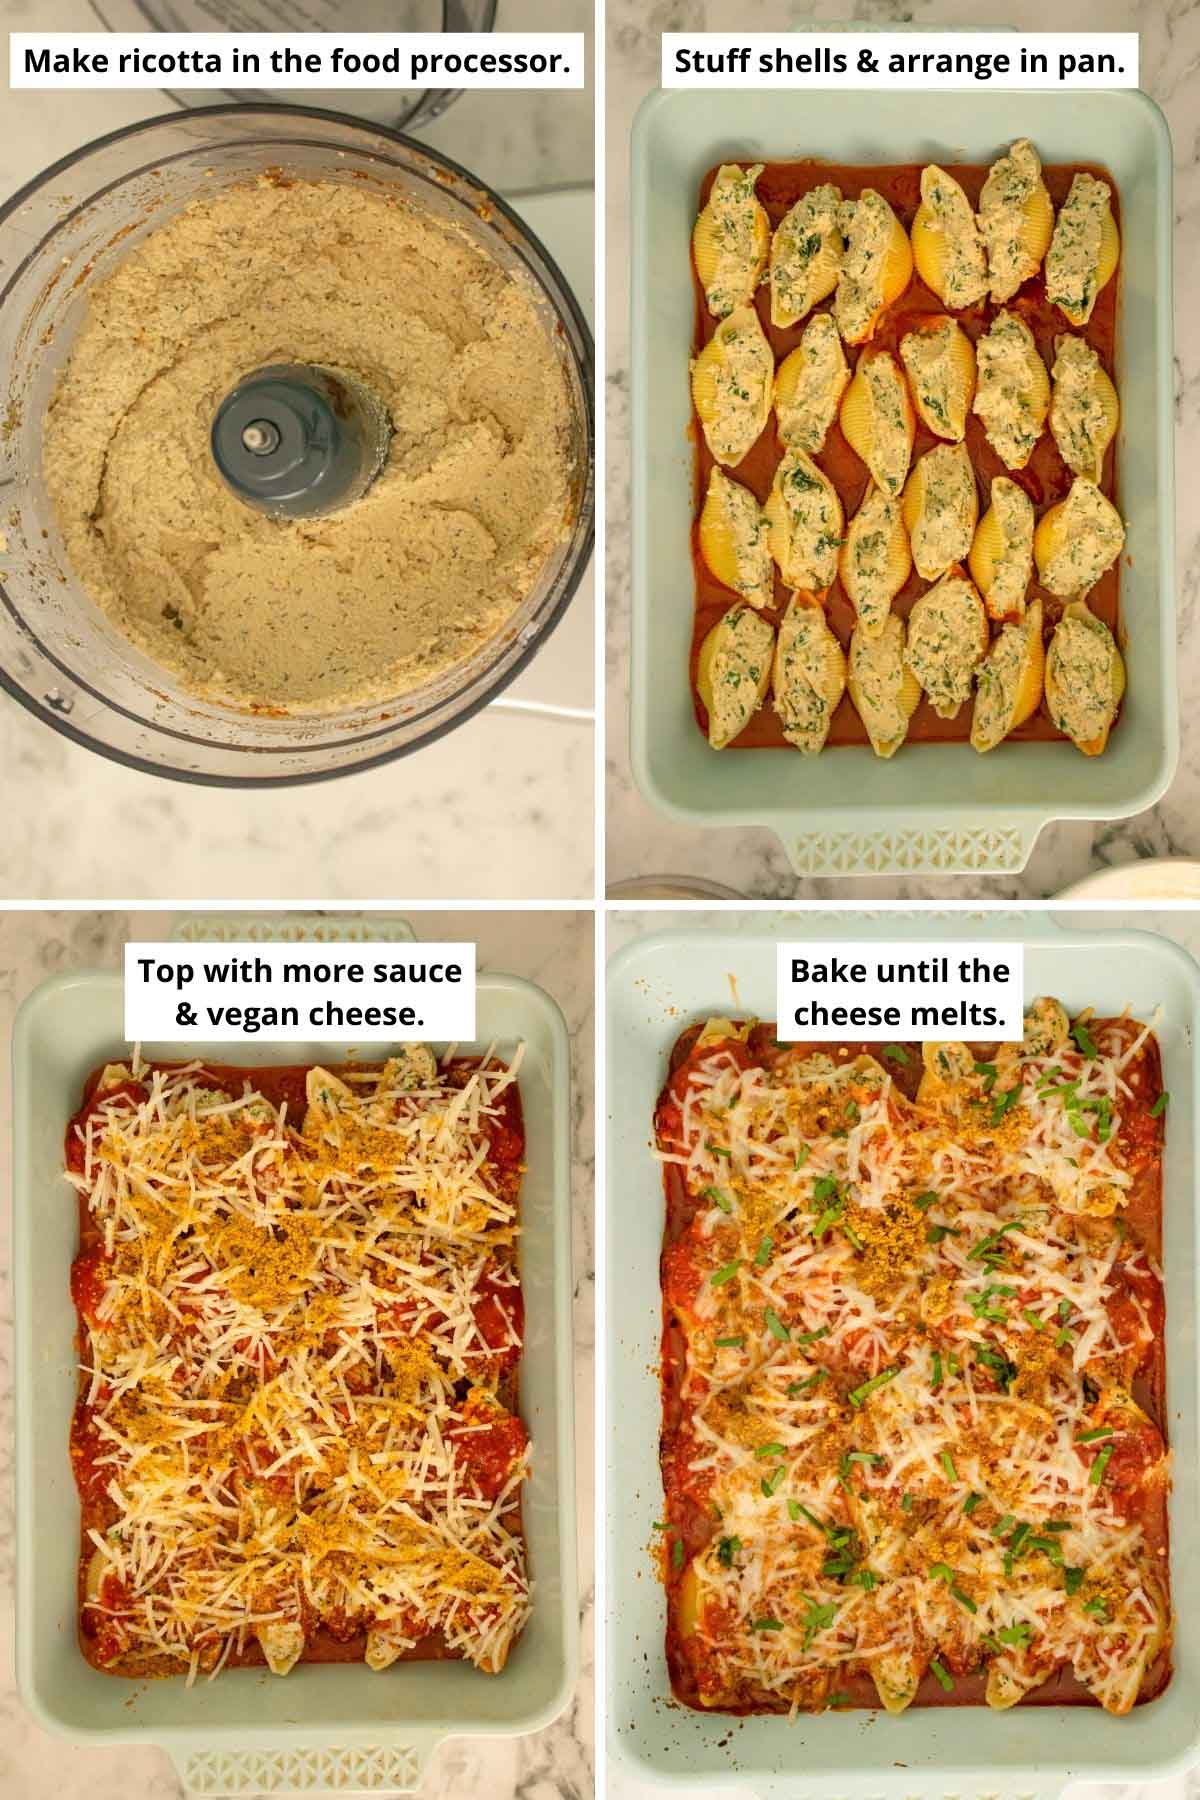 image collage showing the ricotta in the food processor and then photos of the stuffed shells in the pan before and after adding the sauce and cheese and after baking